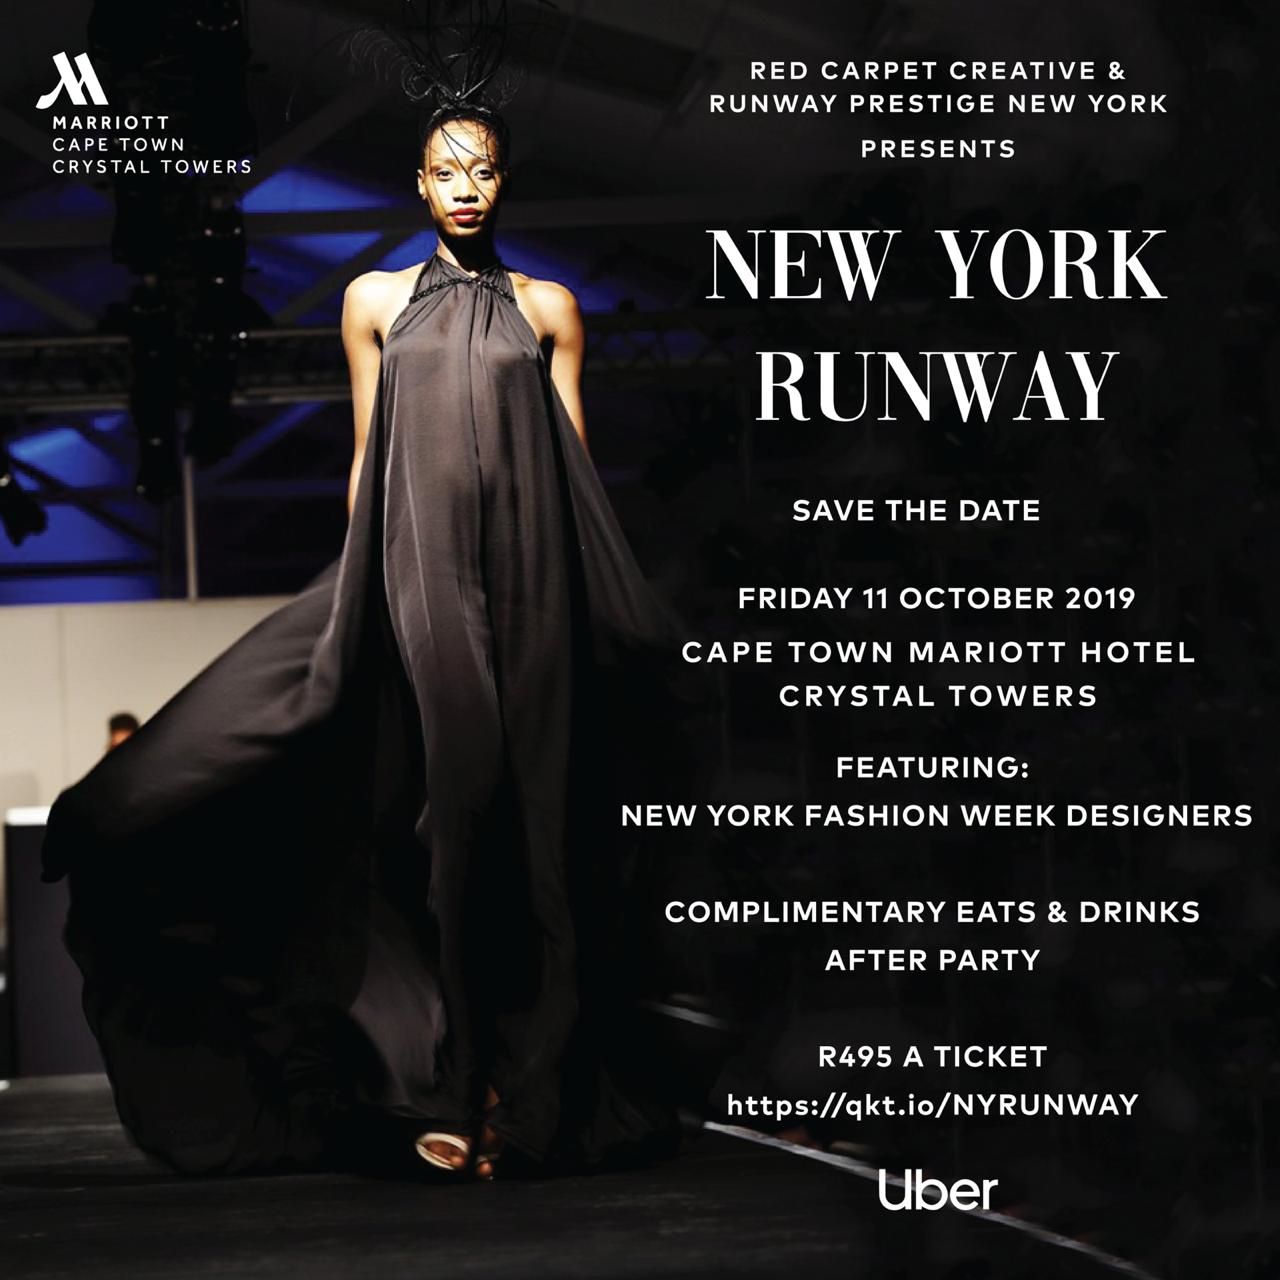 The New York Runway comes to SA in October